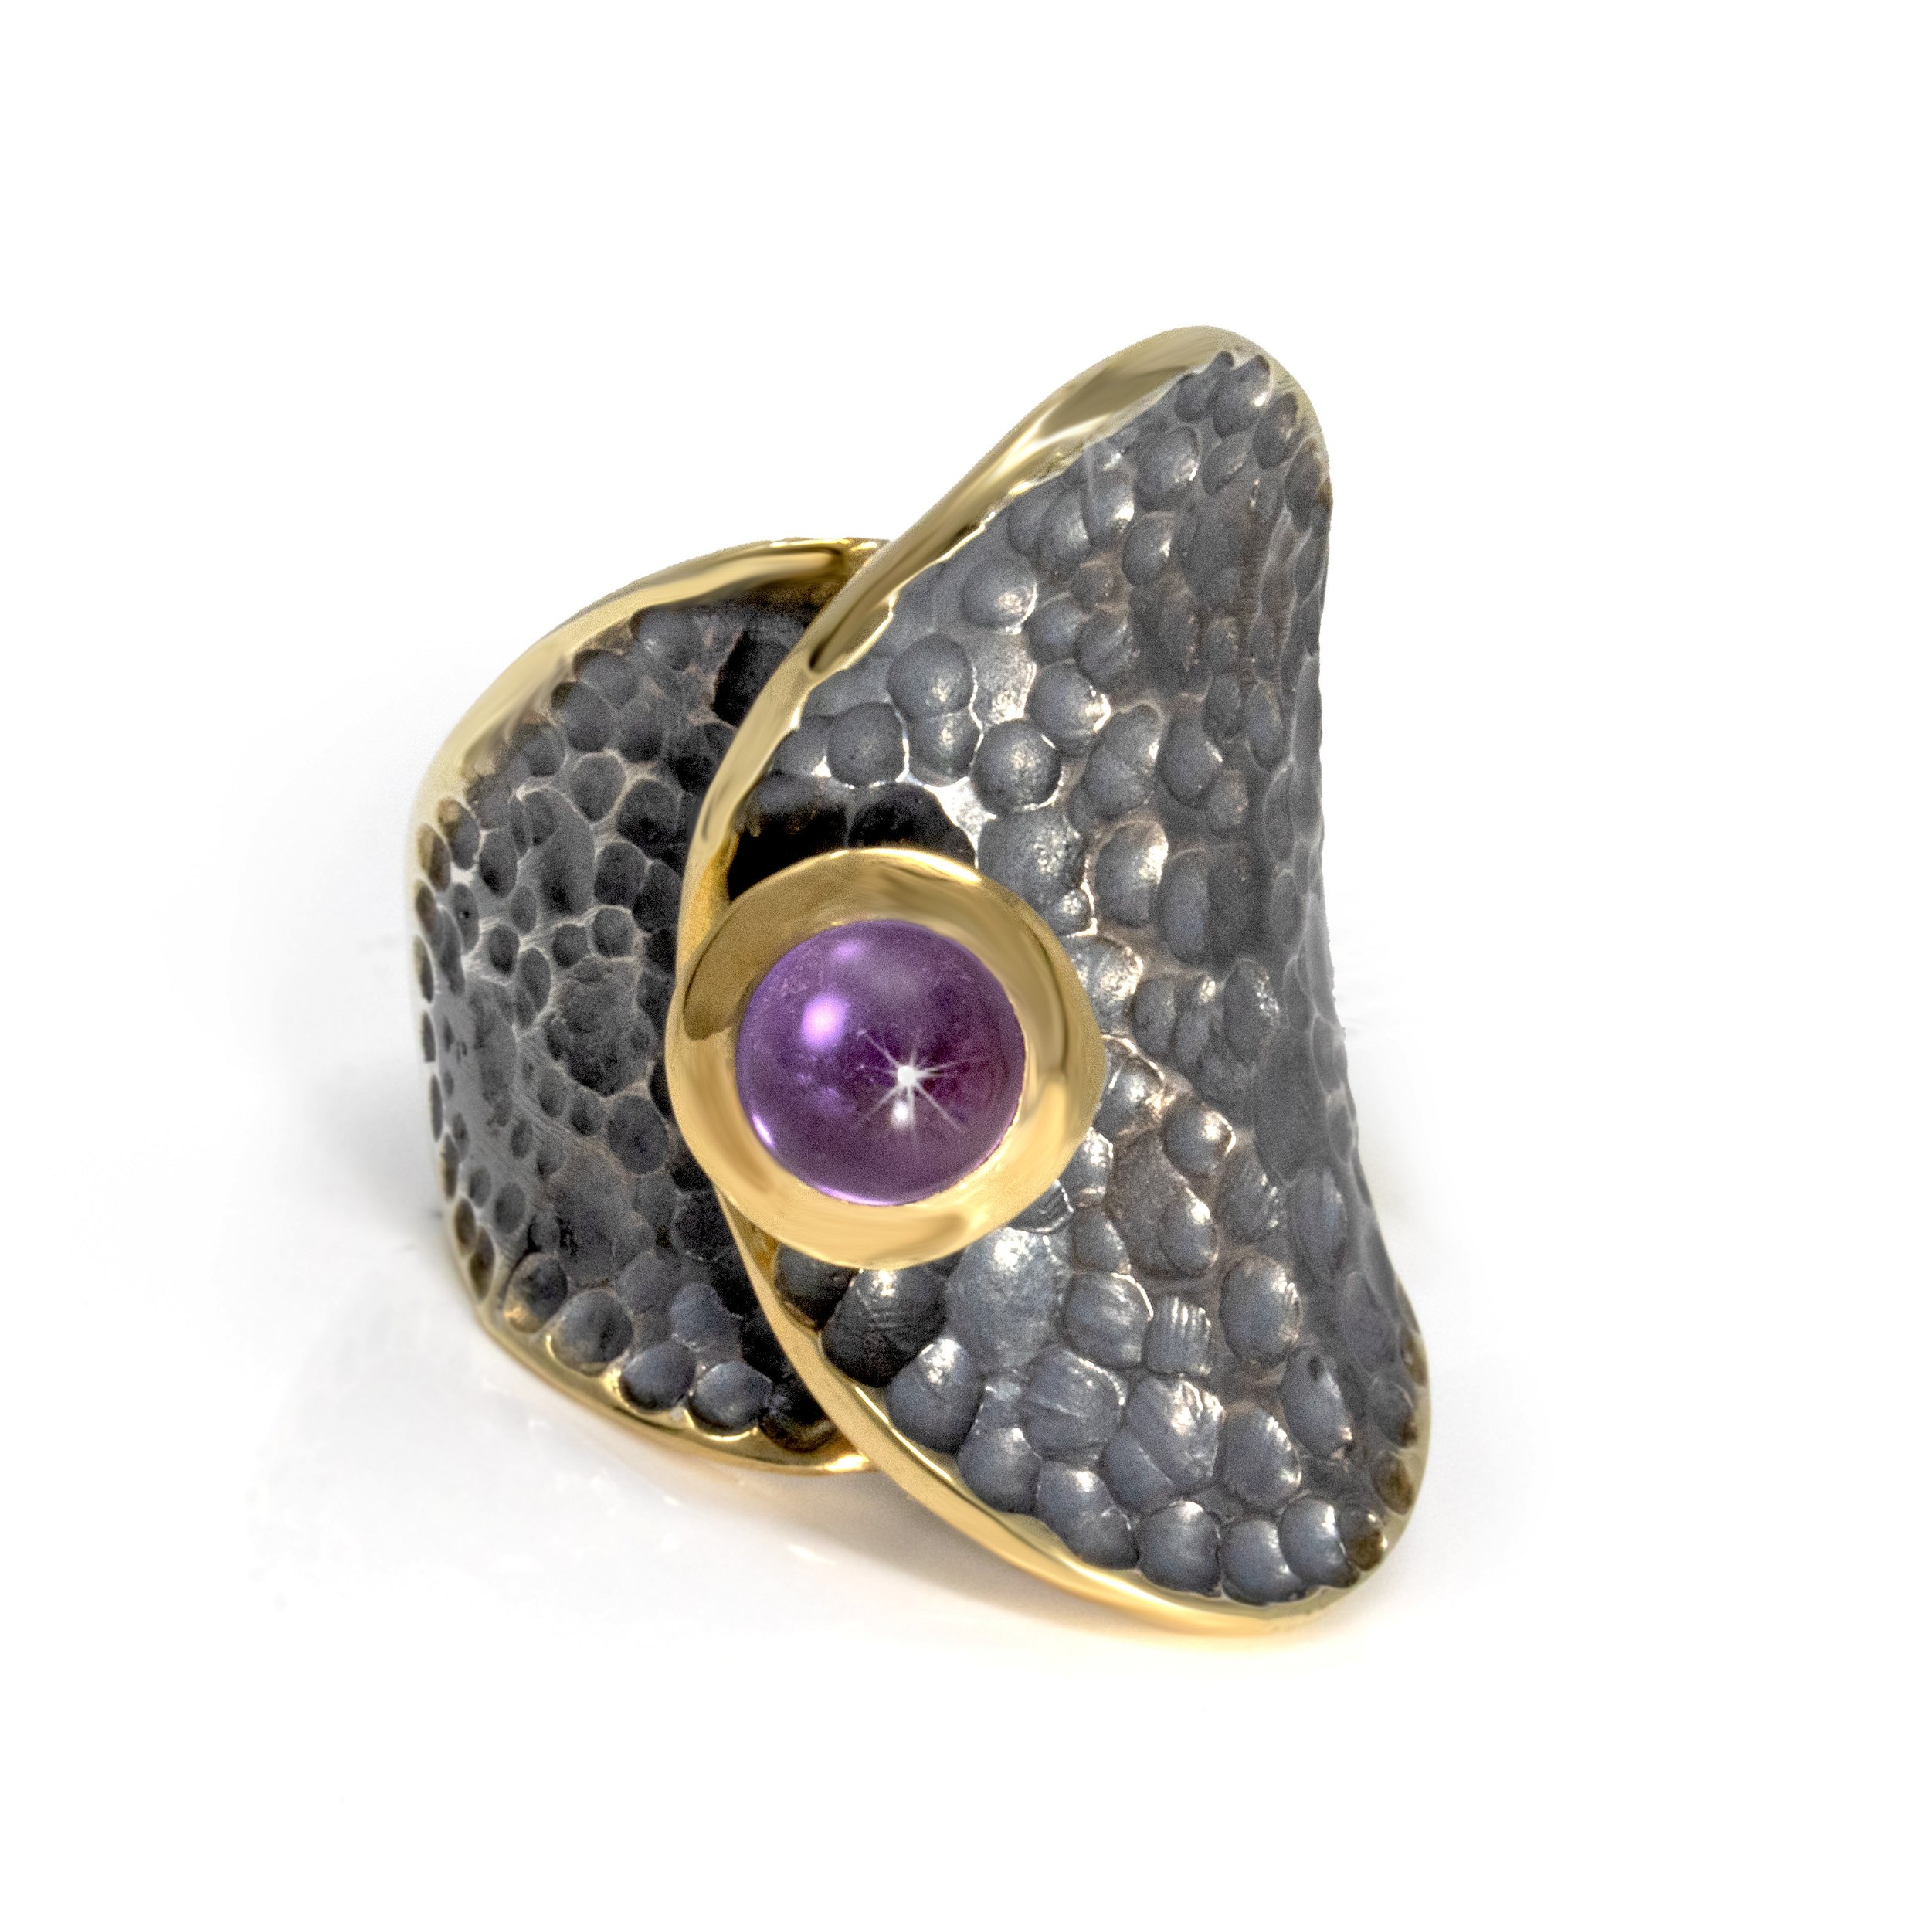 Amethyst Ring - Round Cabochon With Gold Vermeil Bezel Set On Hammered Oxidized Band With "Falling Leaf" Folded Design - Gold Vermeil Size 8